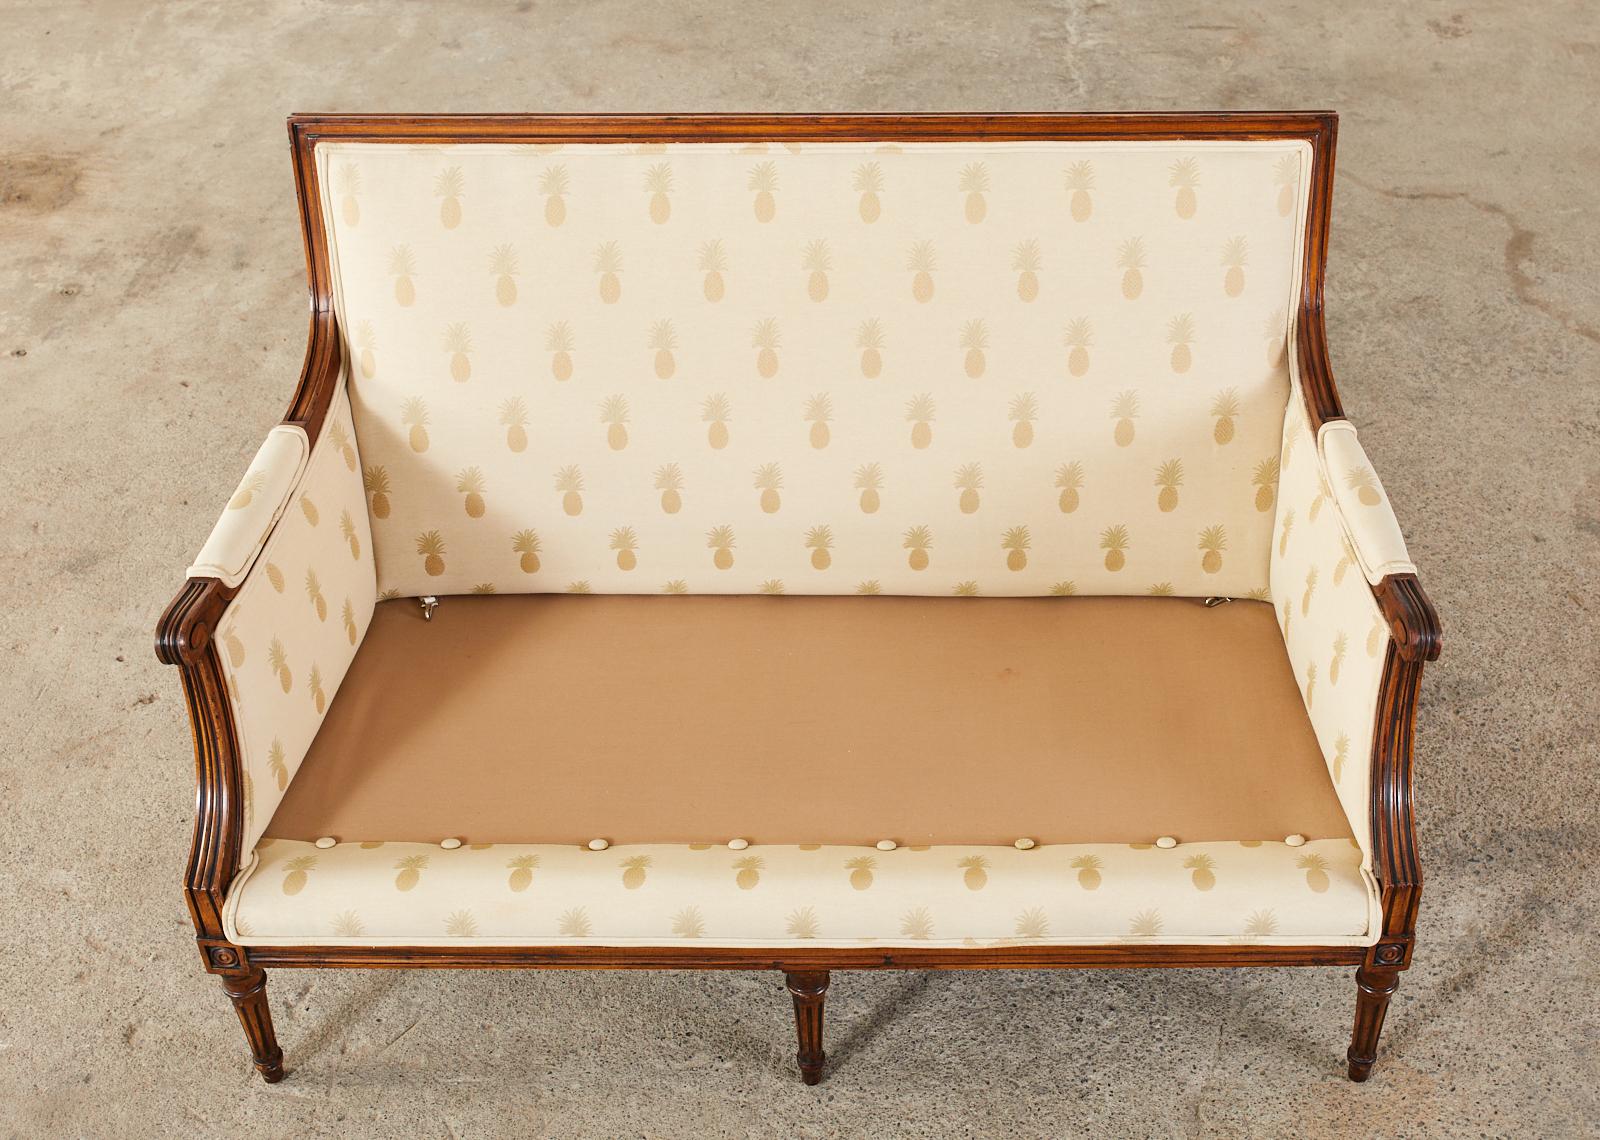 20th Century French Louis XVI Style Settee with Pineapple Motif Fabric